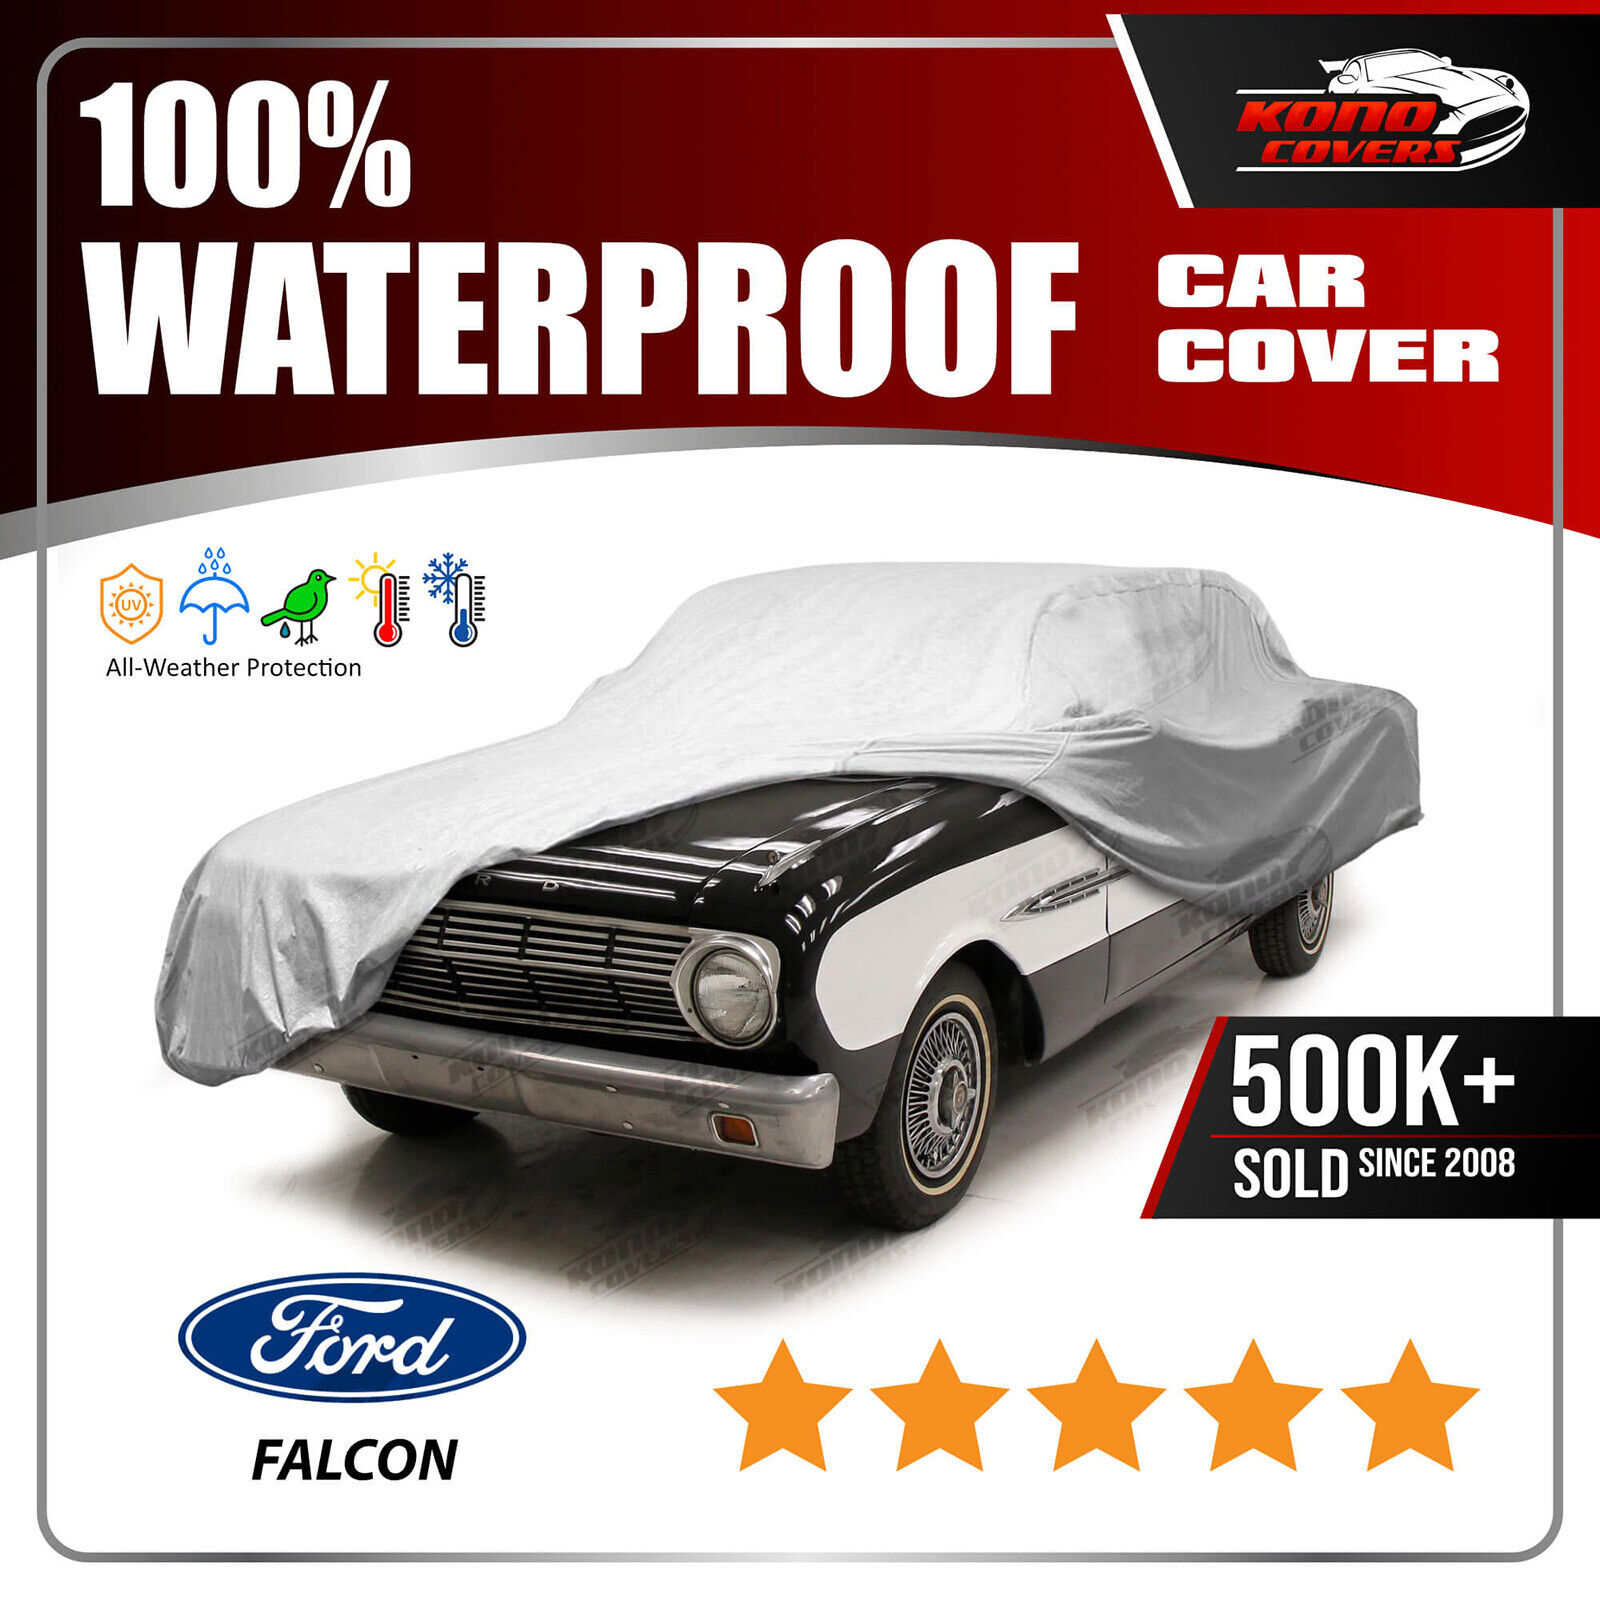 FORD FALCON 1960-1963 CAR COVER - 100% Waterproof 100% Breathable